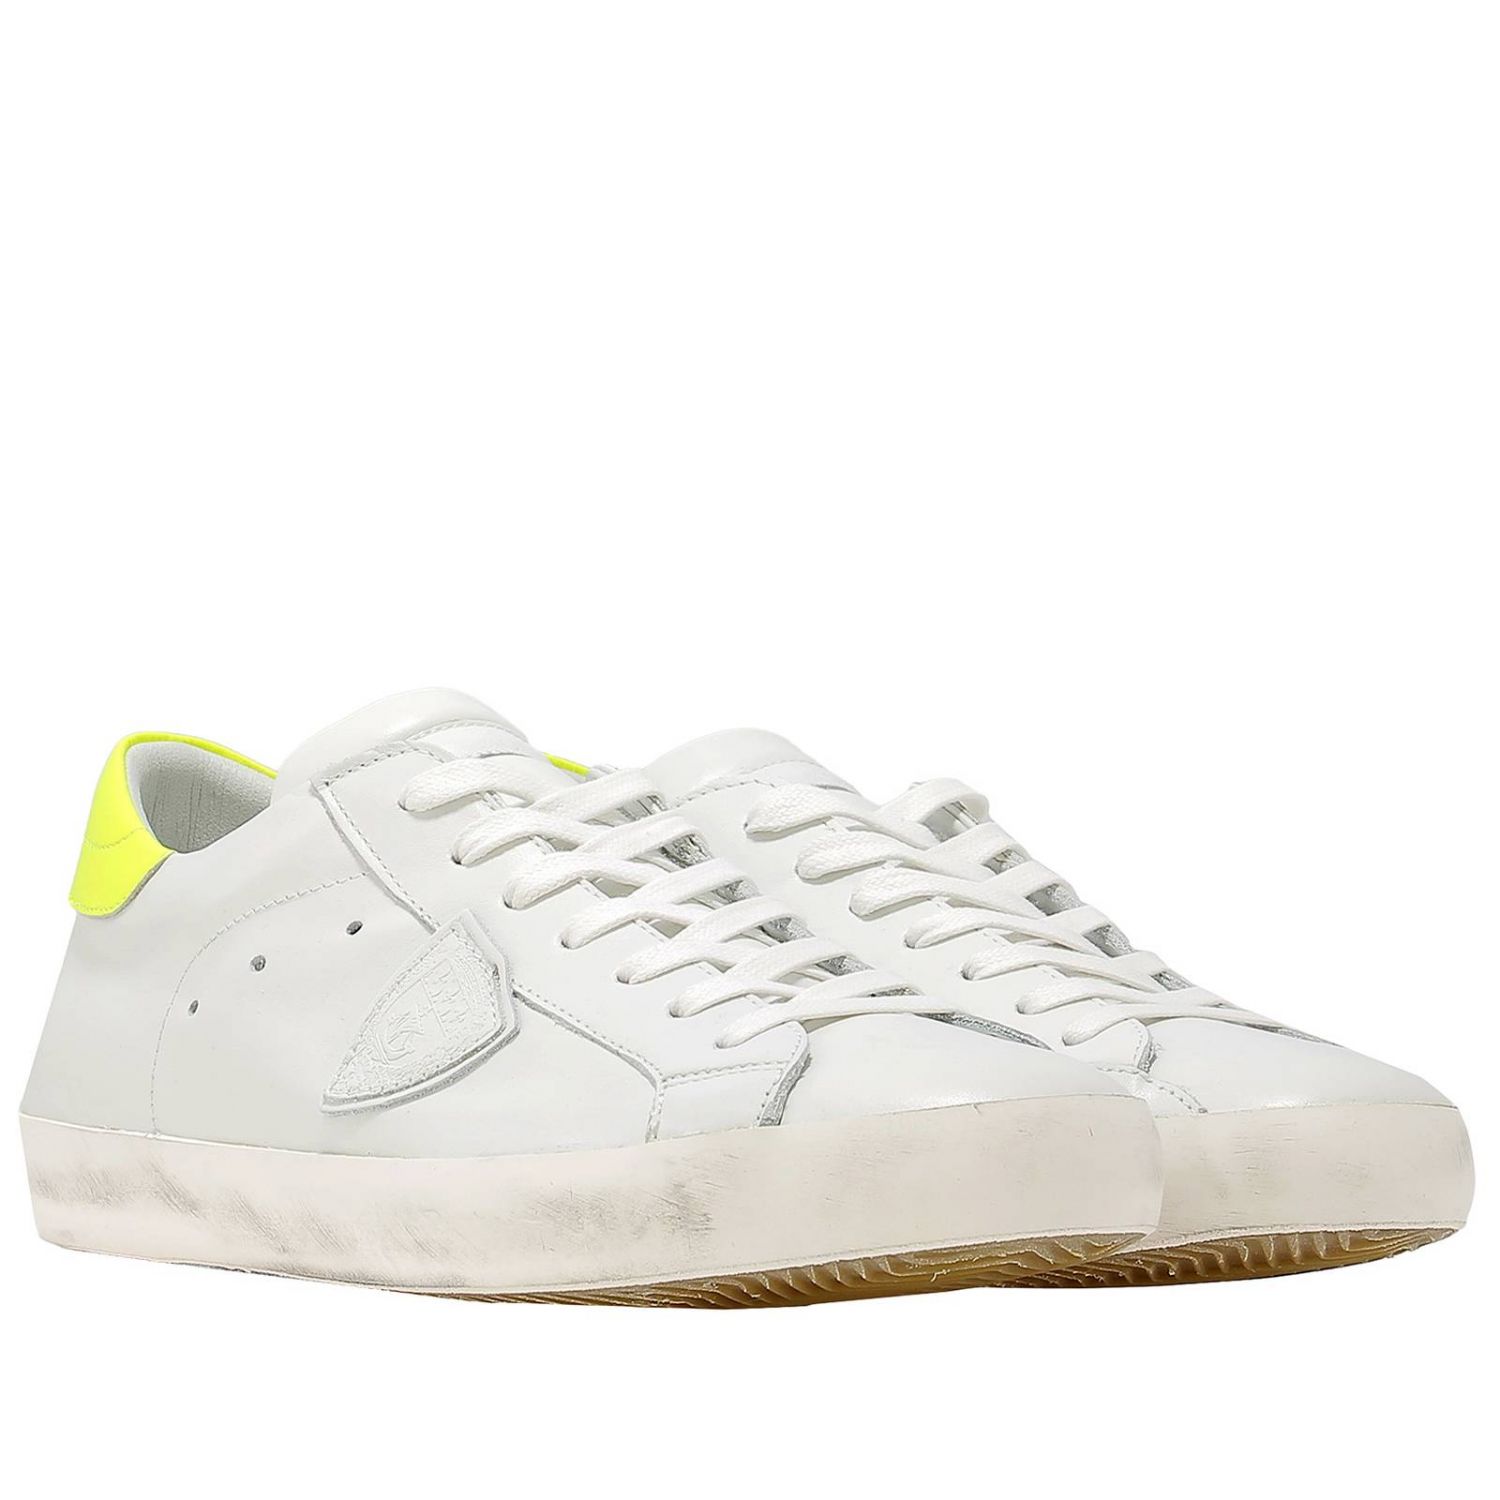 Philippe Model Outlet: Shoes men - Yellow | Sneakers Philippe Model ...